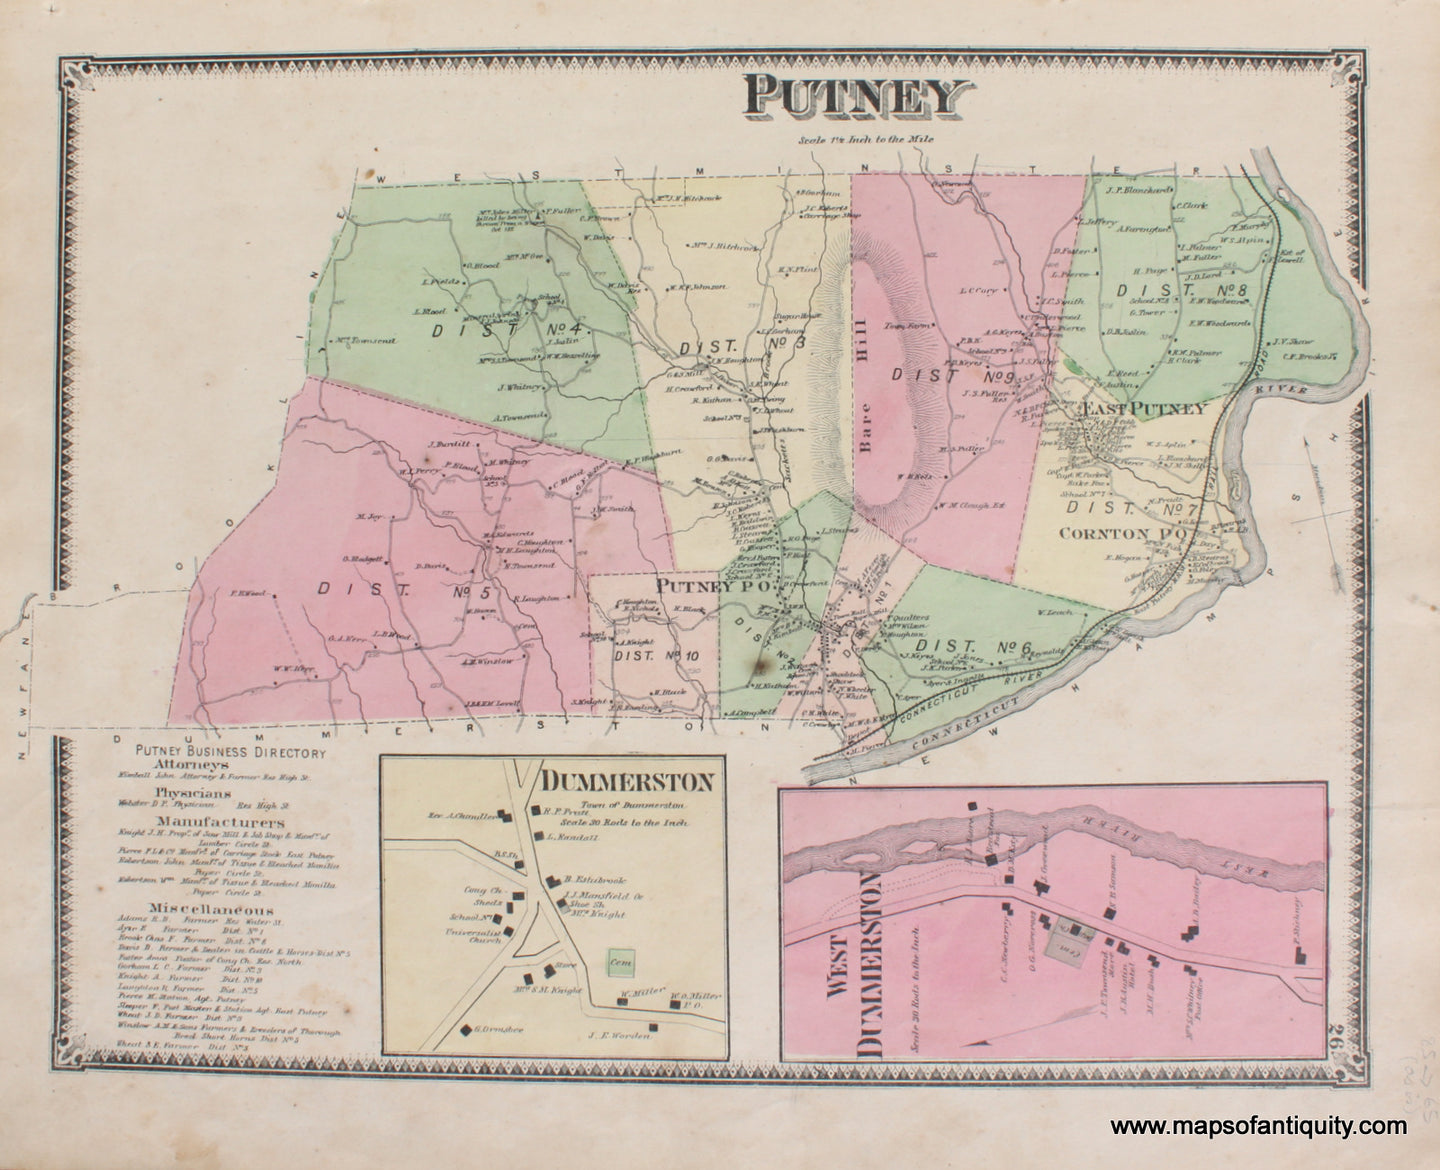 Antique-Hand-Colored-Map-Putney-VT---Vermont-United-States-Northeast-1869-Beers-Maps-Of-Antiquity